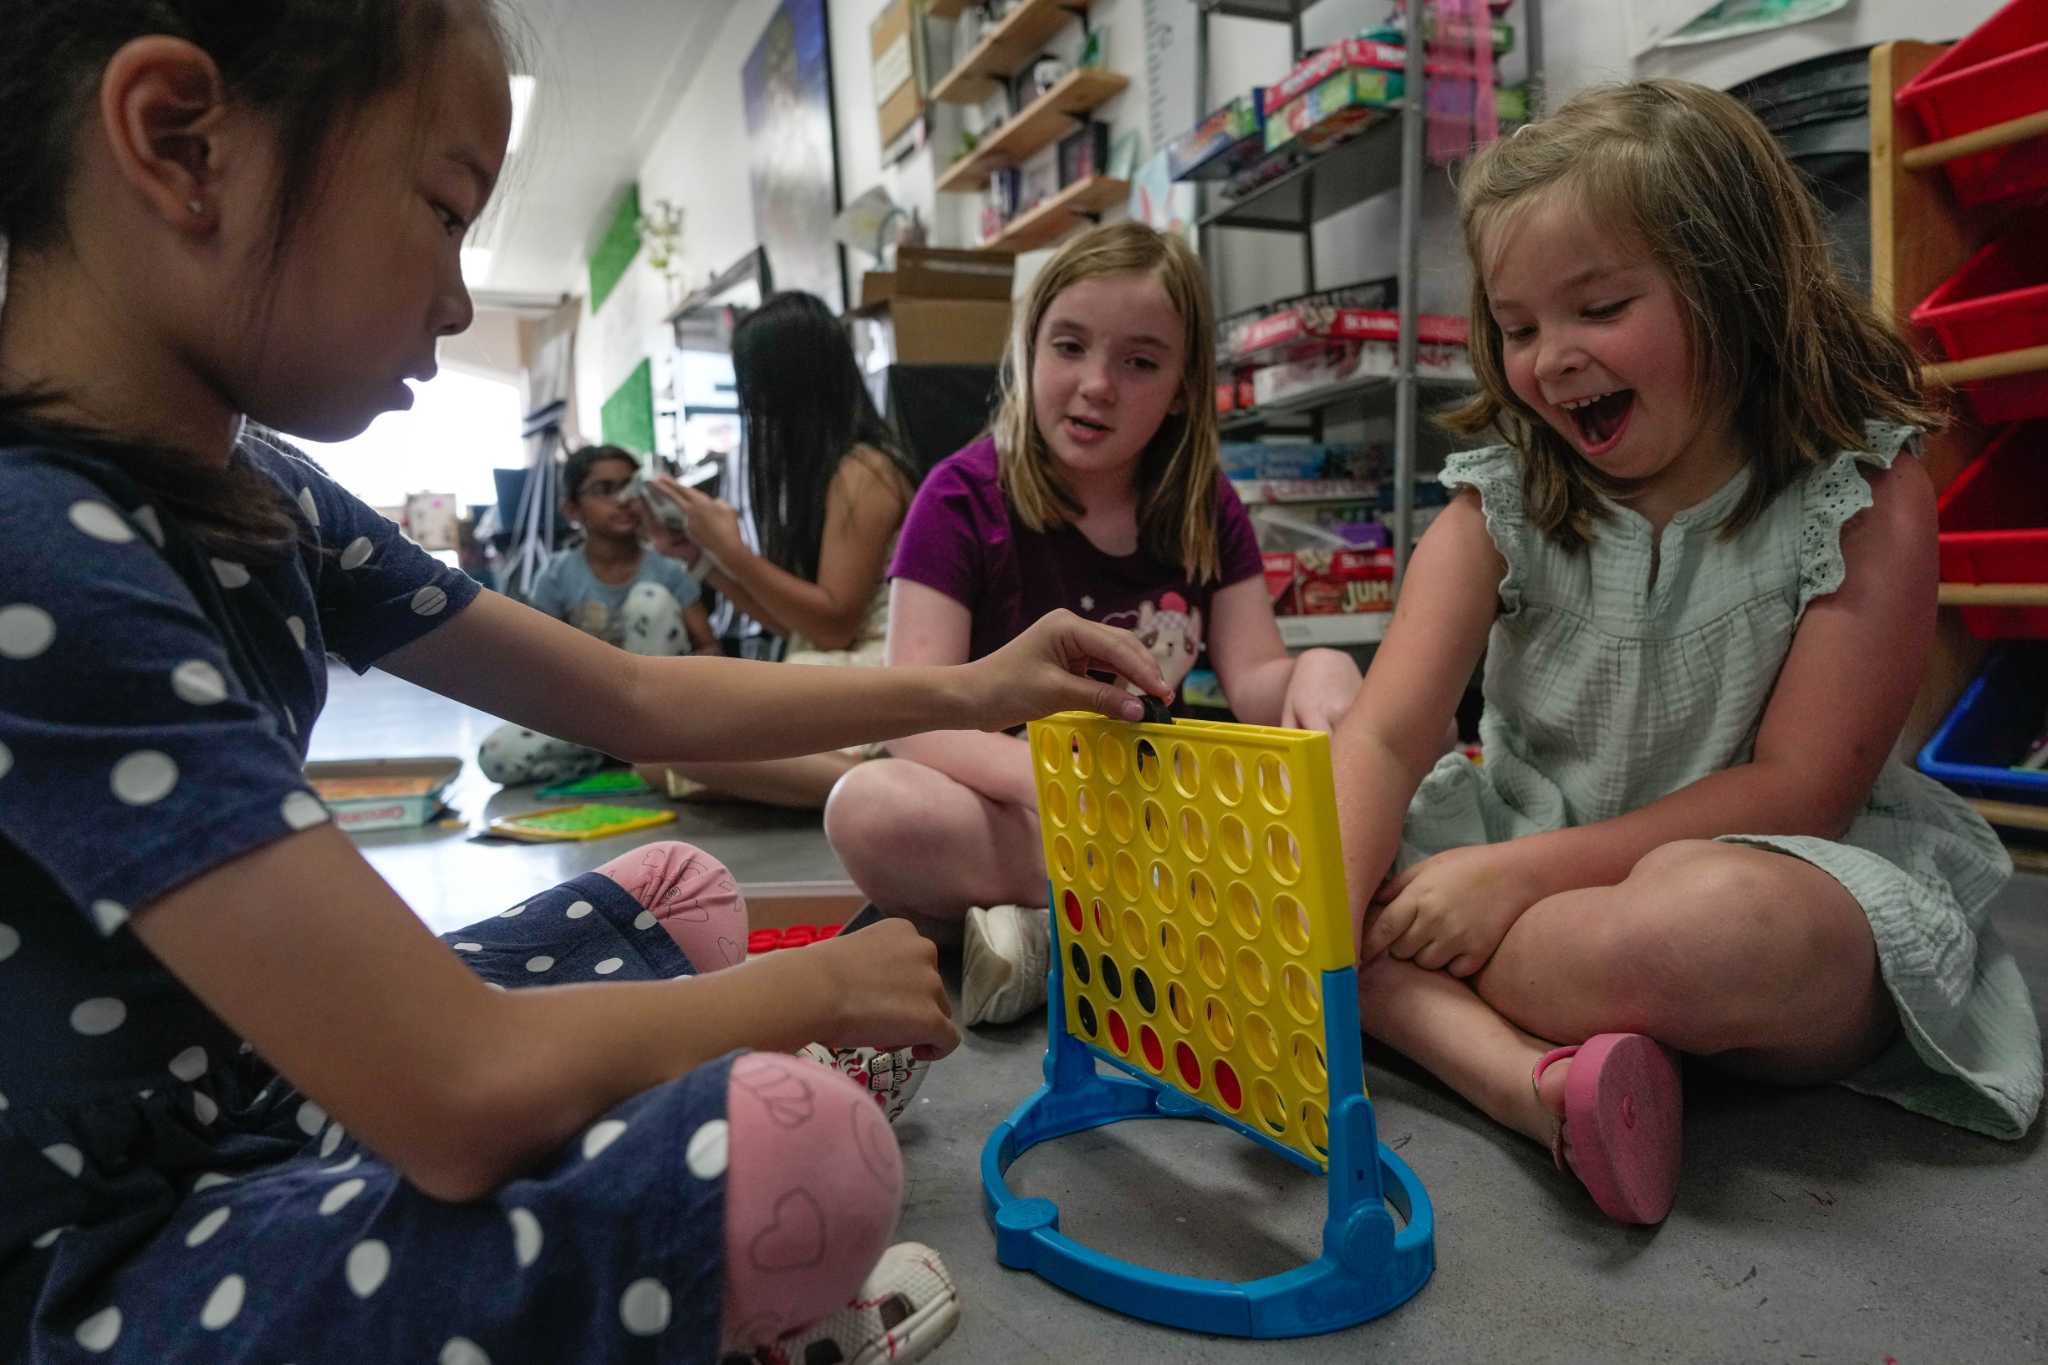 Houston summer camps aim to keep prices affordable amid inflation